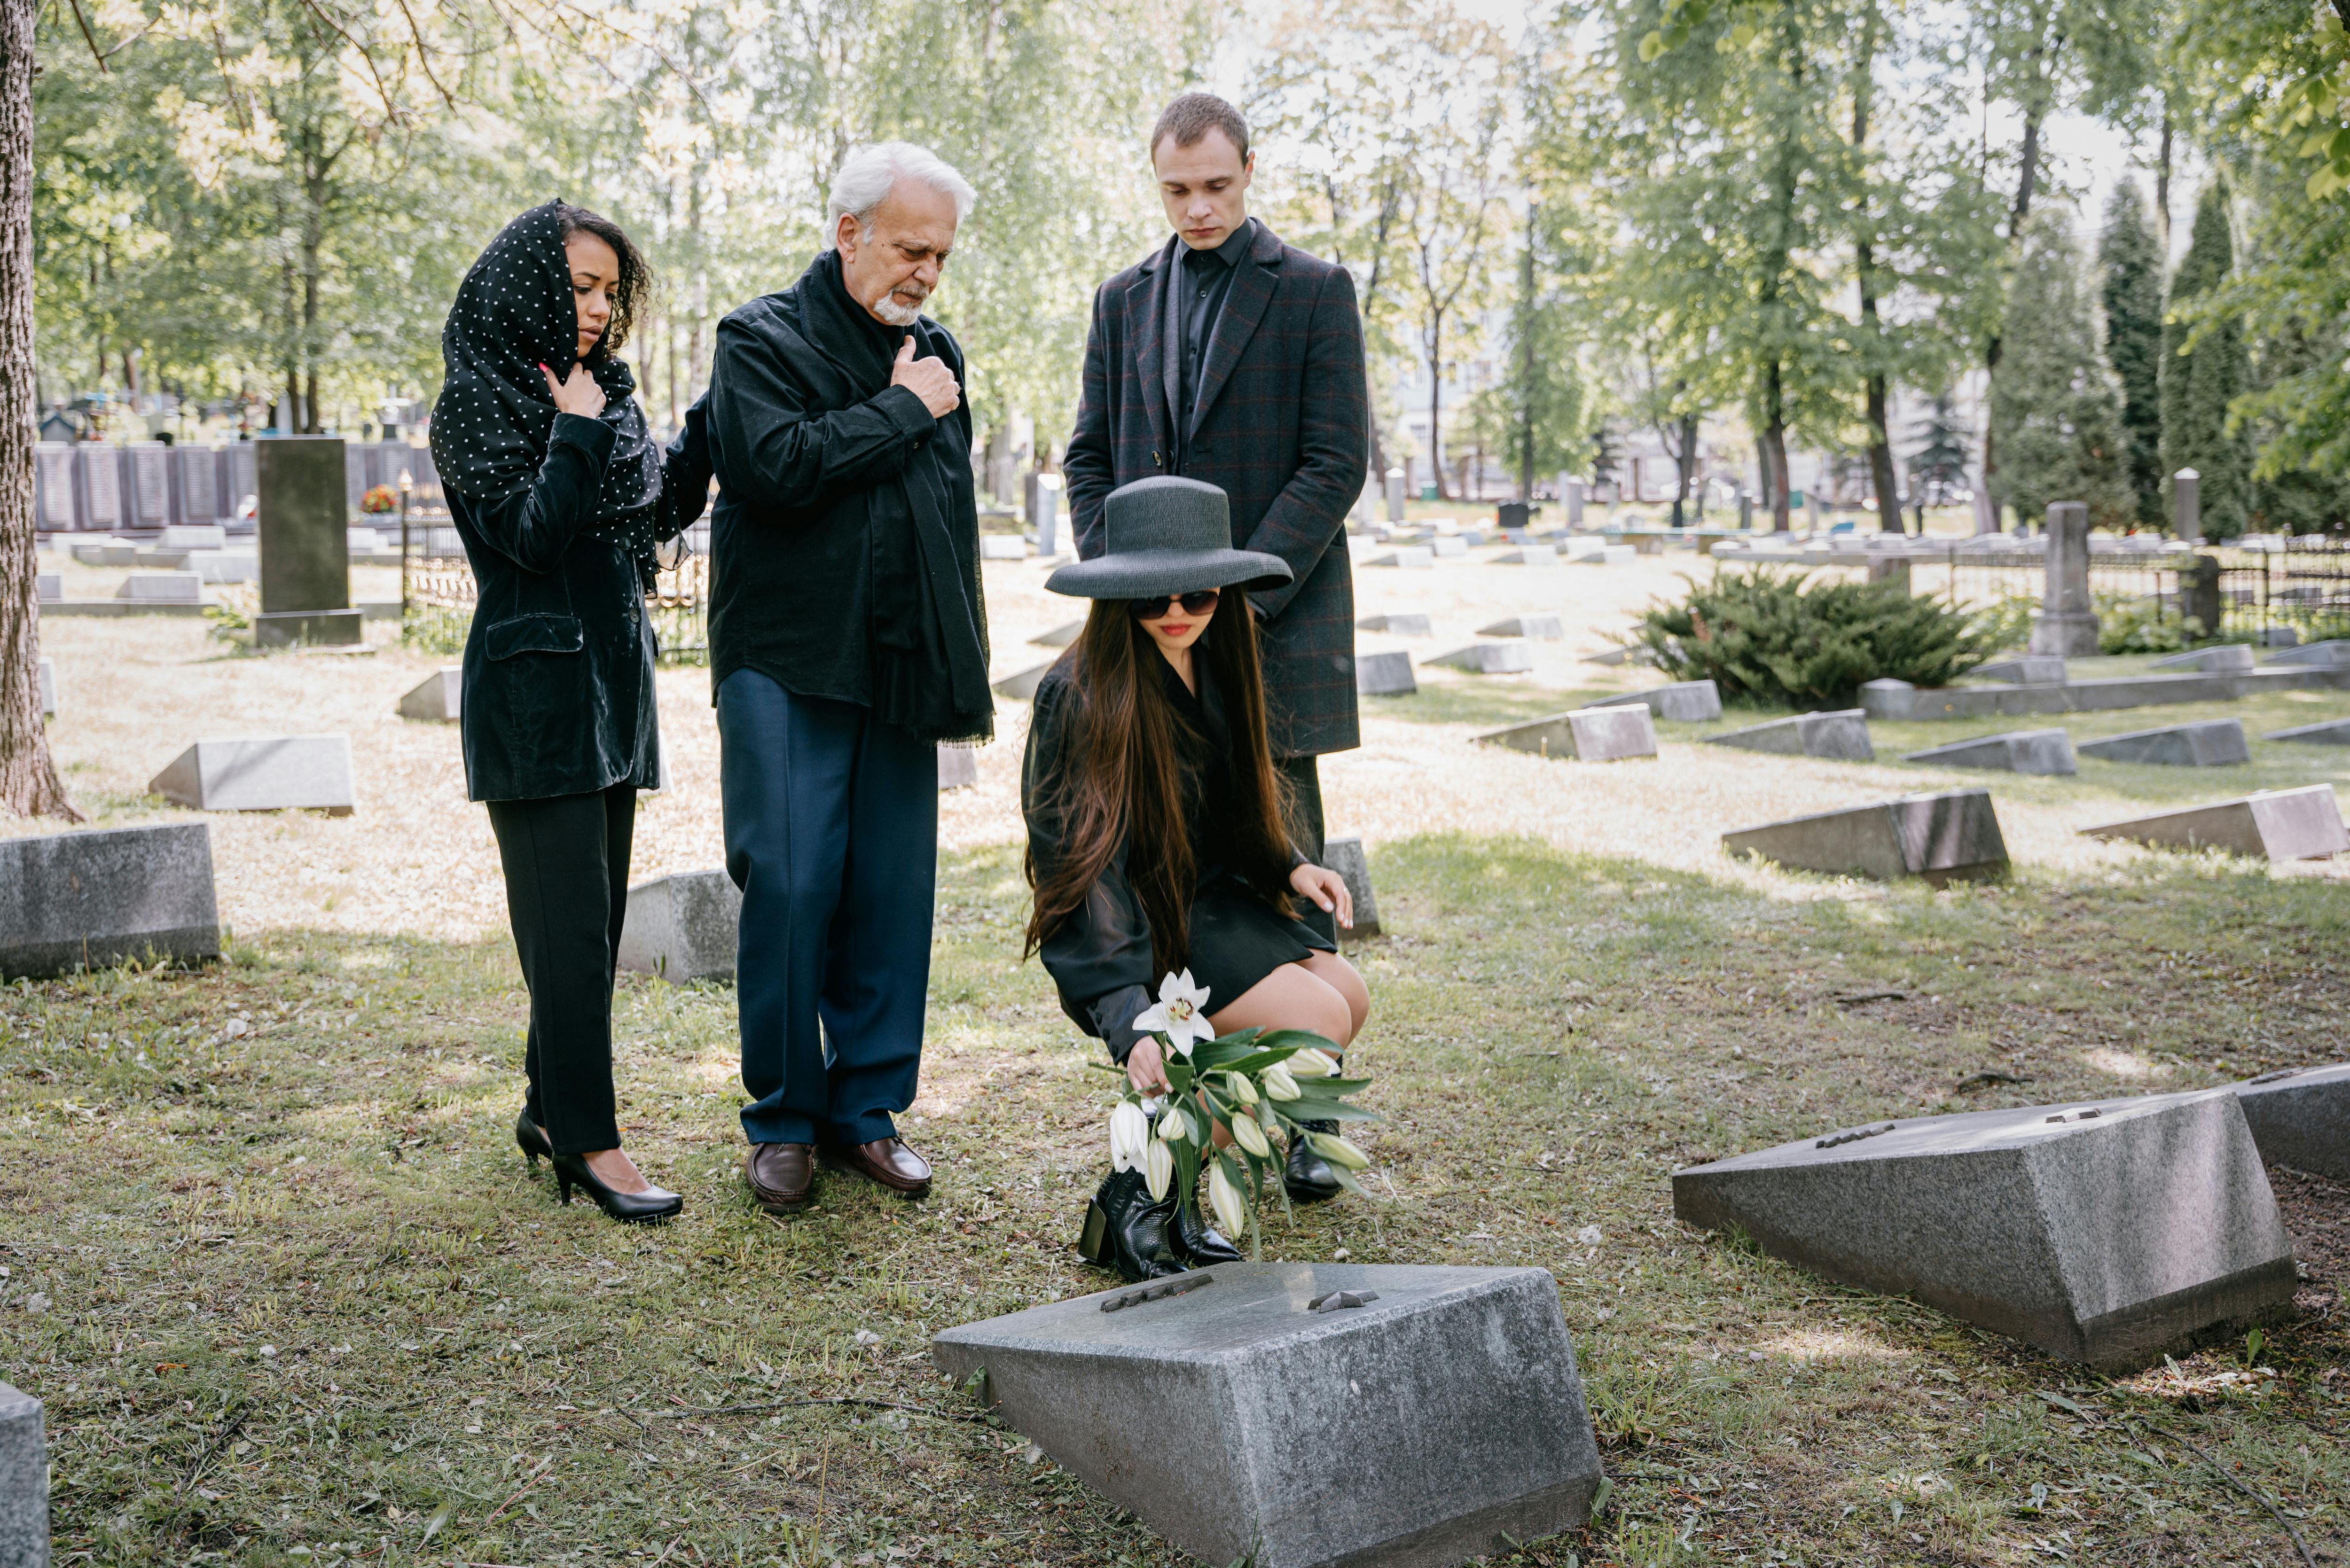 A family mourning at the cemetery | Source: Pexels